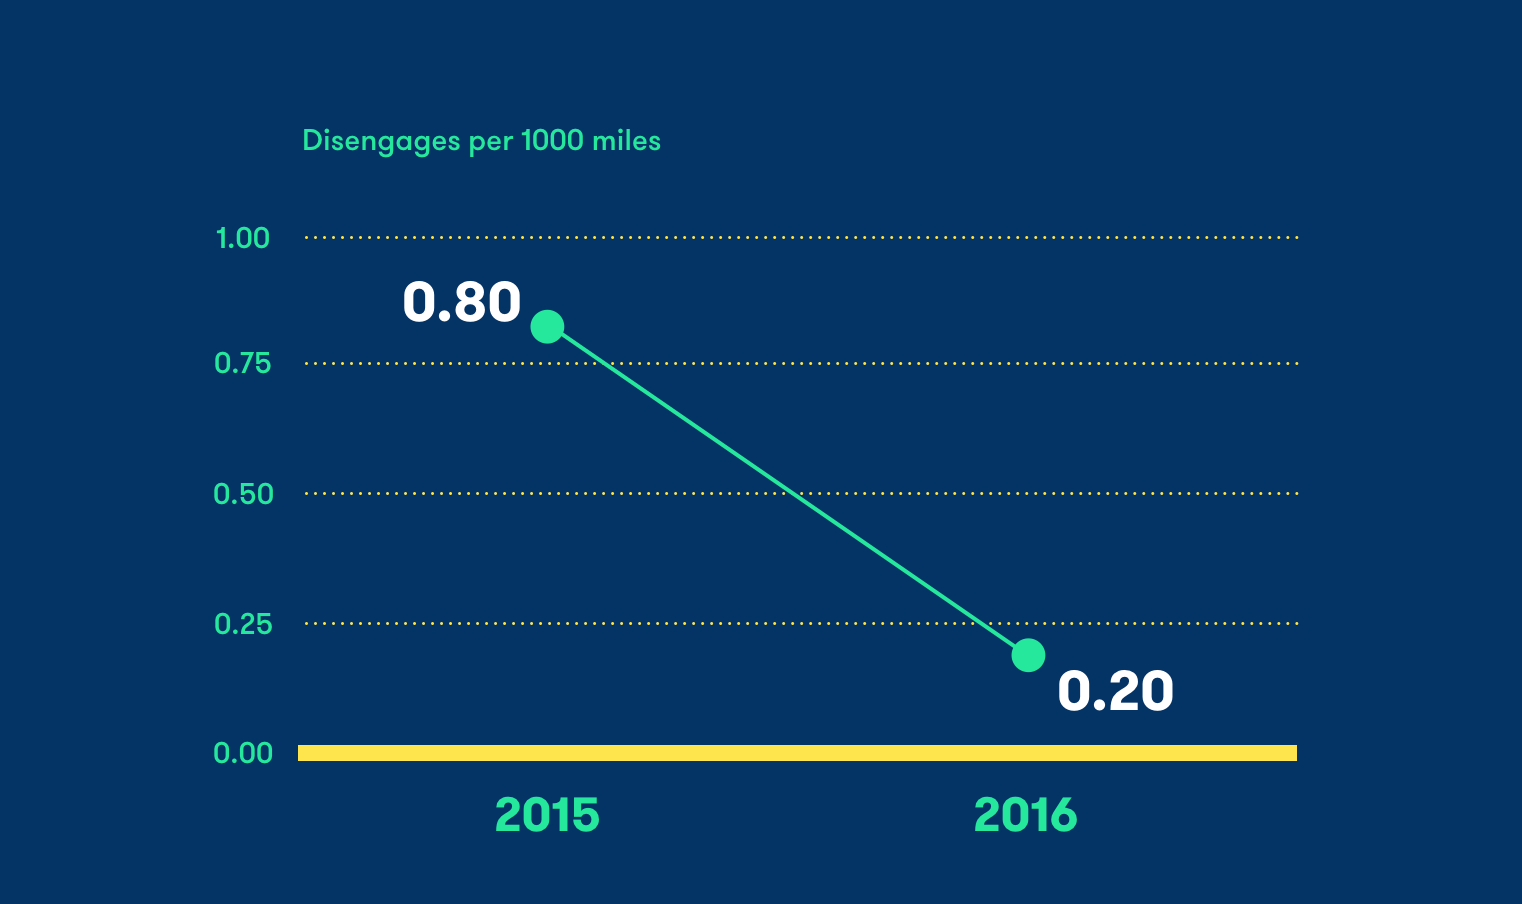 Chart showing drop in .80 Disengages per 1000 miles in 2015 compared to .20 disengages per 1000 milesw